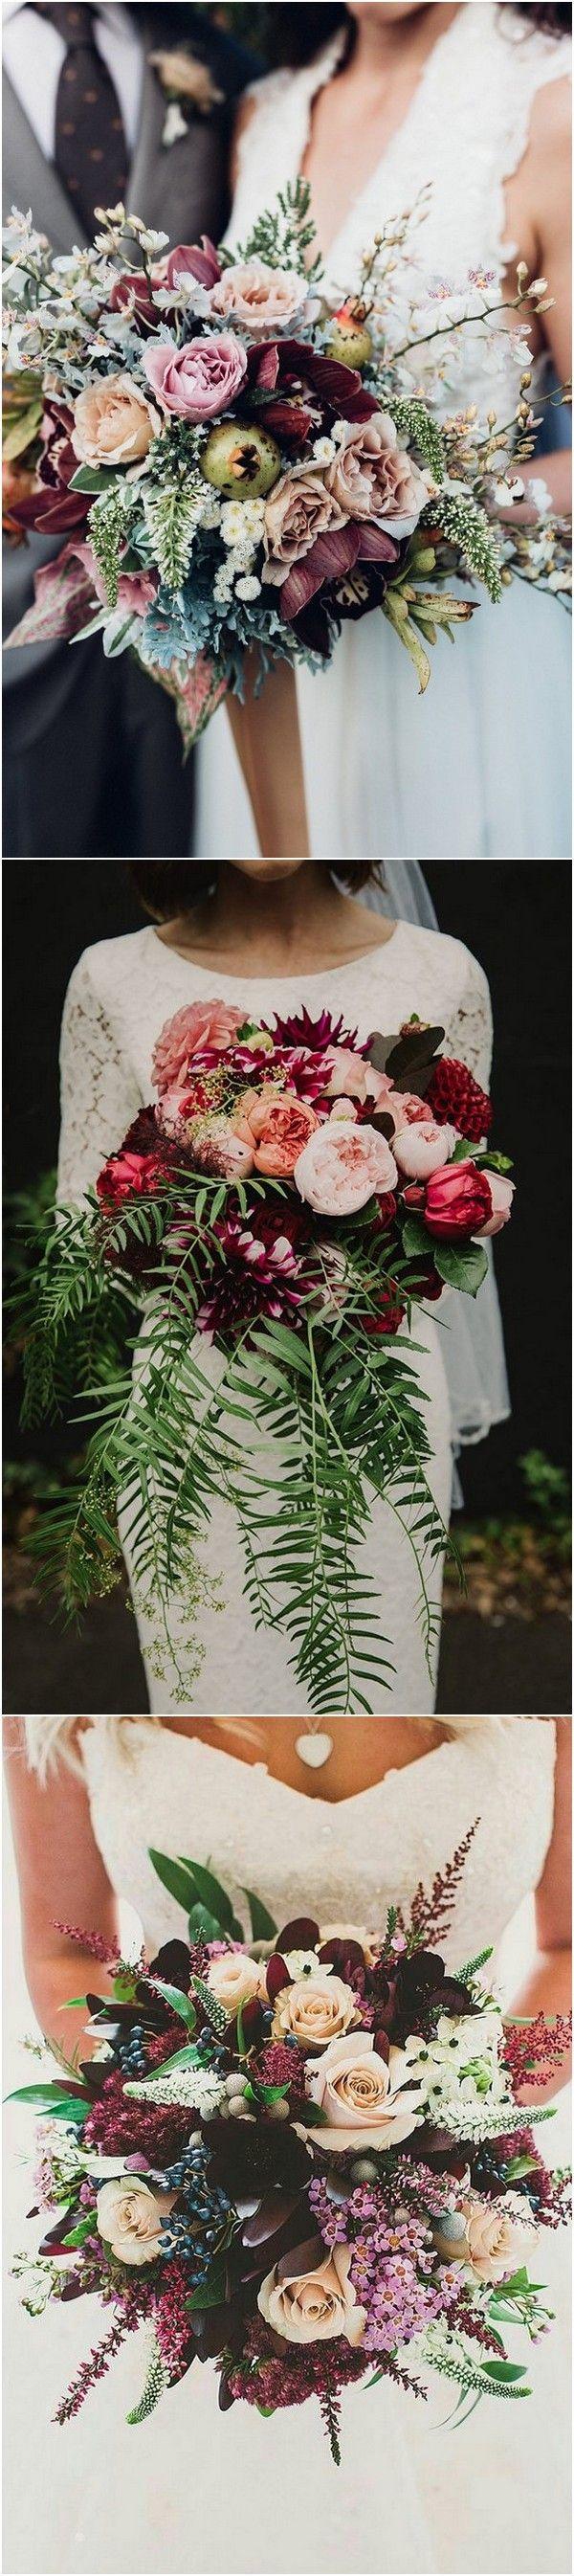 Wedding - Trending-15 Gorgeous Burgundy And Blush Wedding Bouquet Ideas - Page 2 Of 3